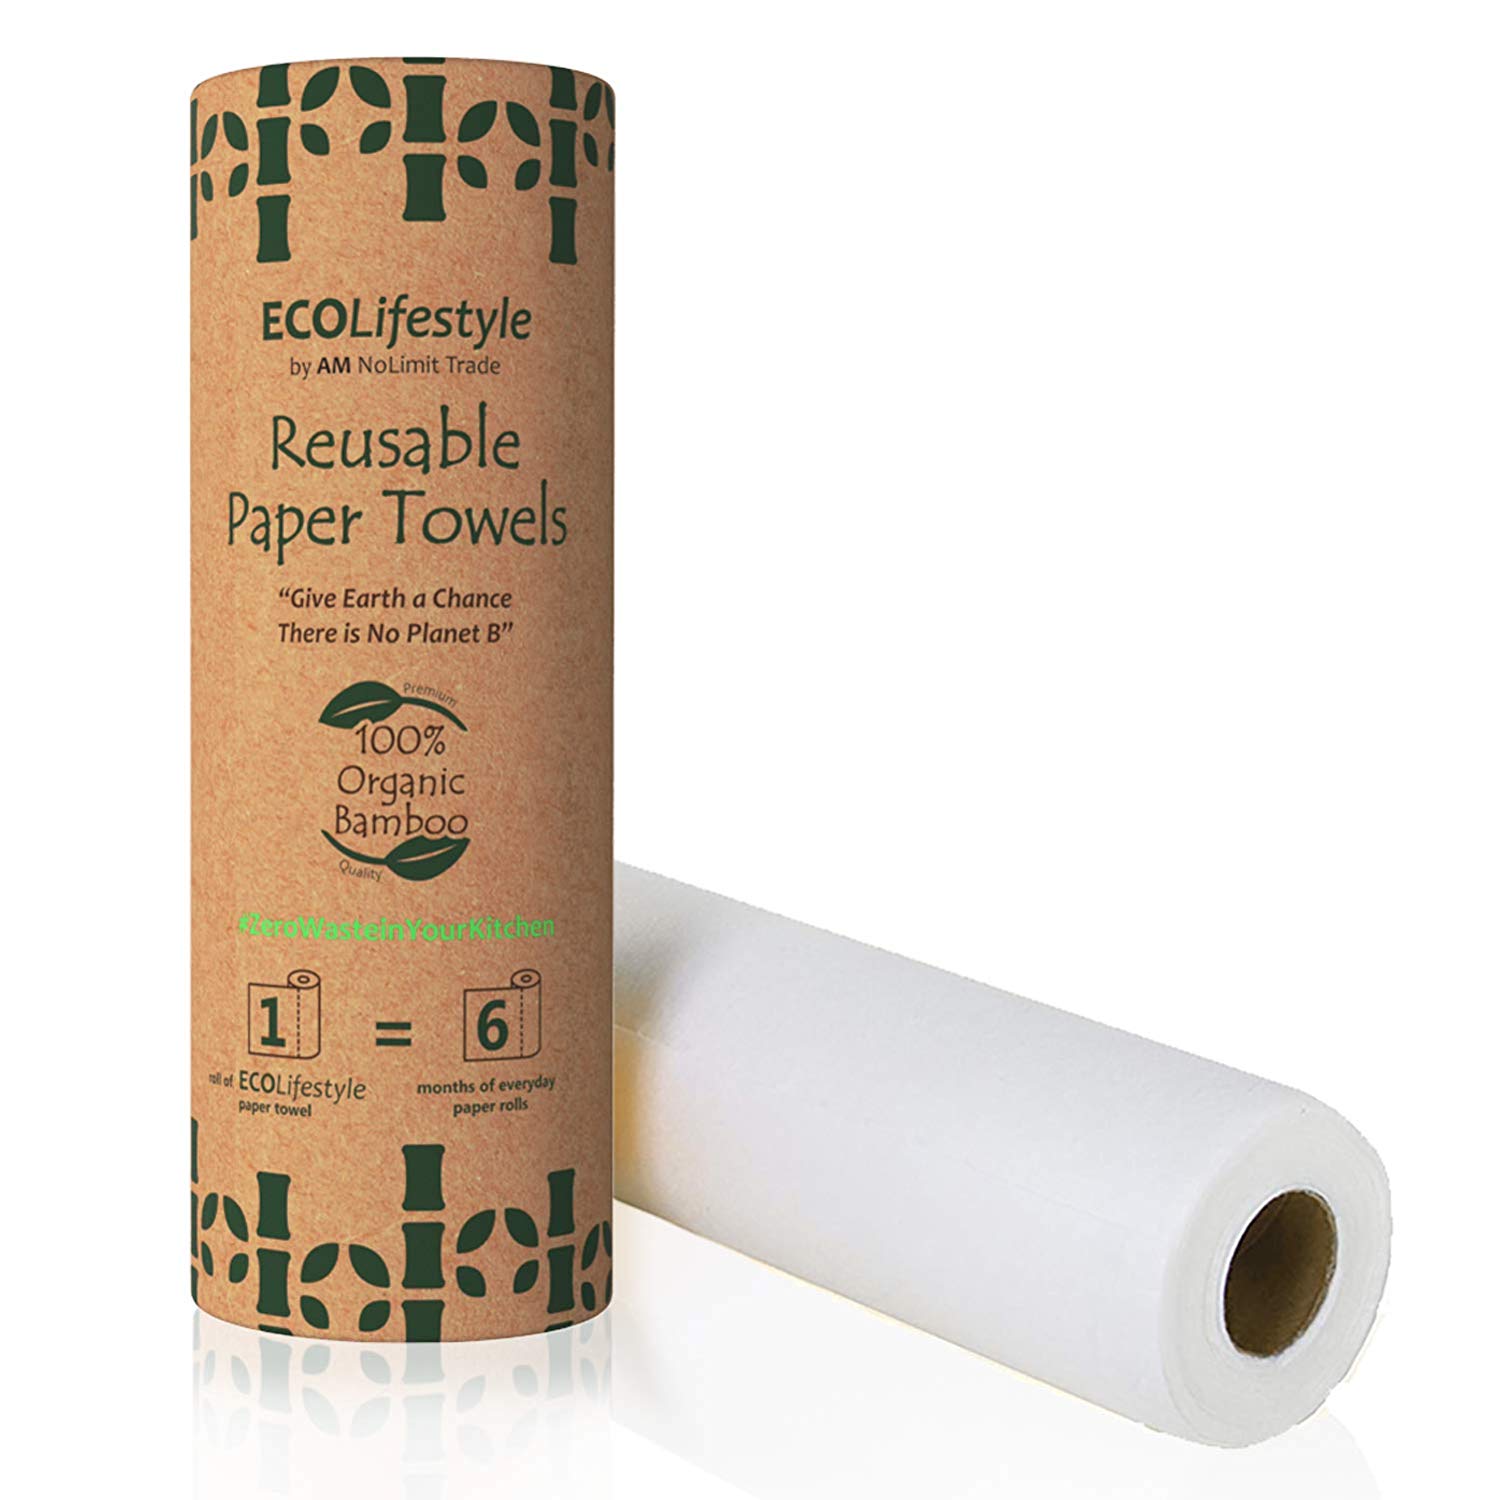 Ecolifestyle Reusable Bamboo Paper Towels, 1 Roll of washable paper towels  New